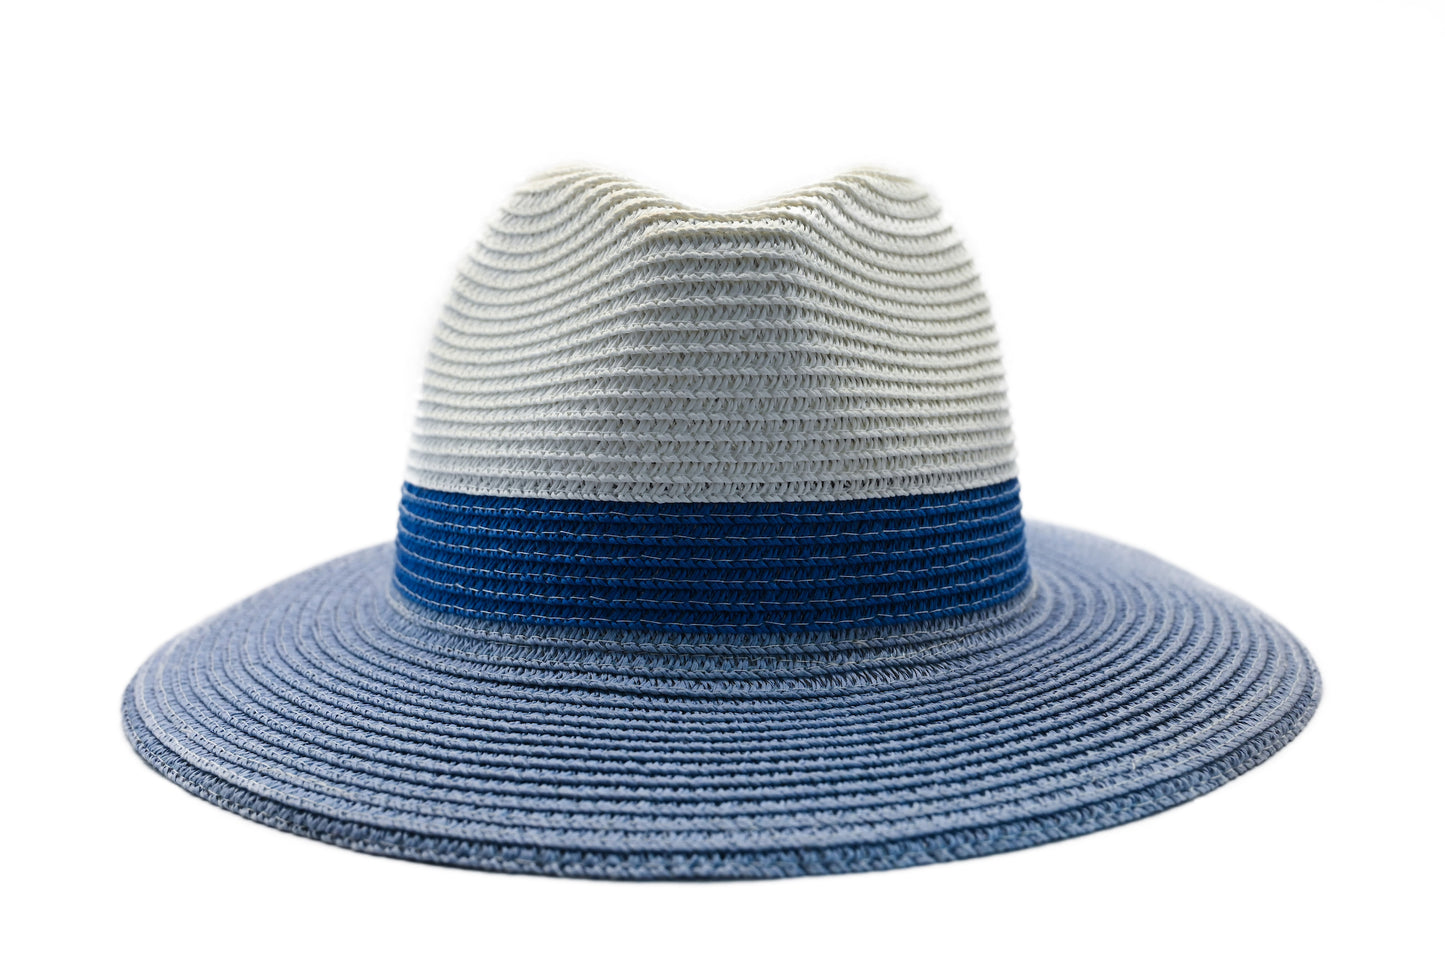 WOMEN’S SUMMER FEDORA WITH UPF PROTECTION